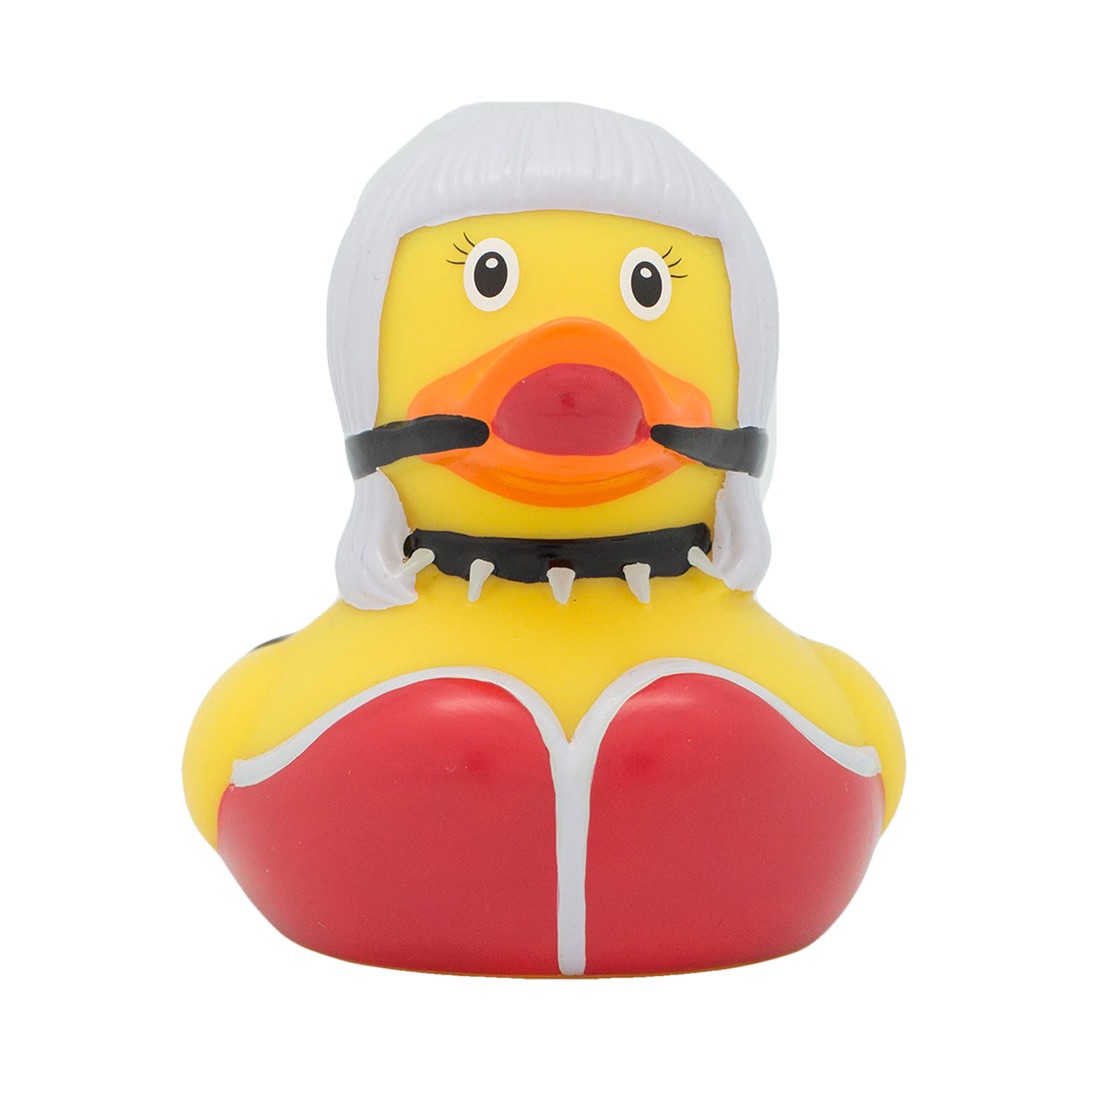 Naughty rubber duck